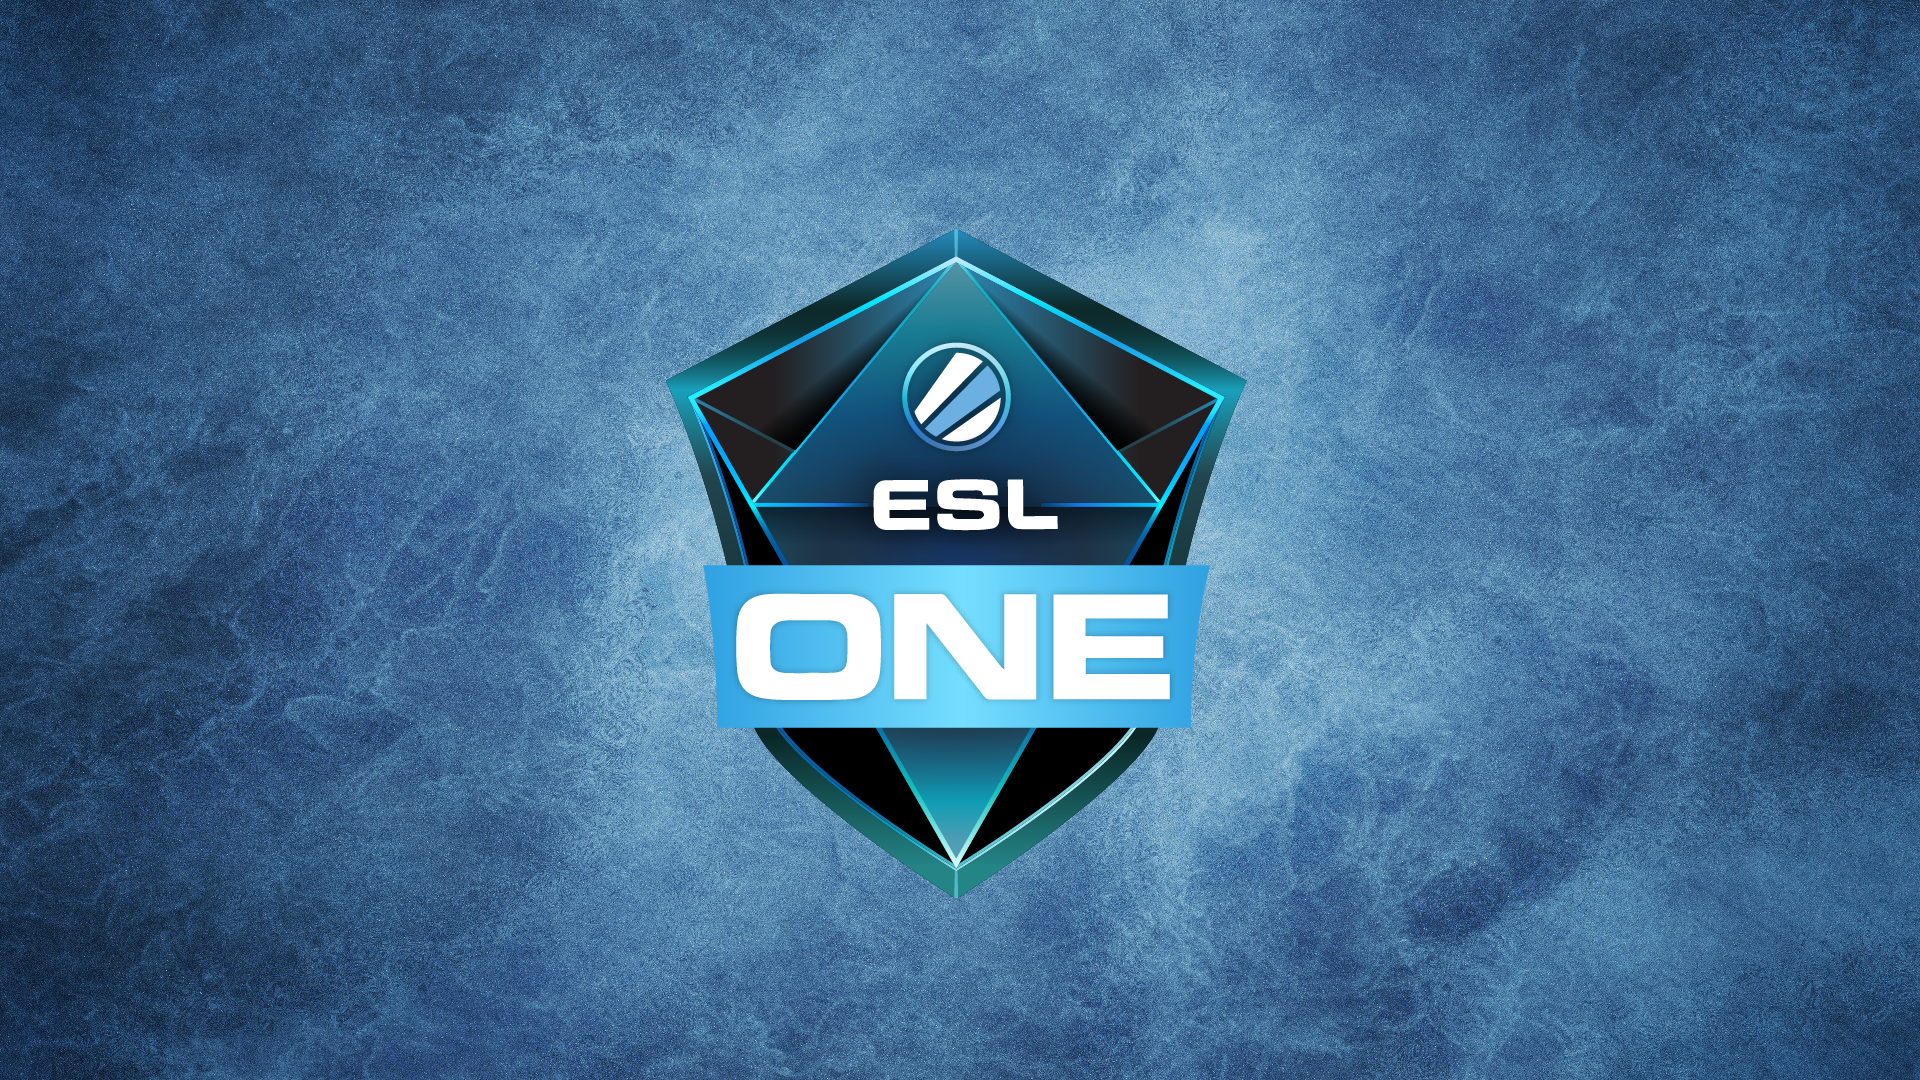 General 1920x1080 esl one Electronic Sports League blue background texture e-sports